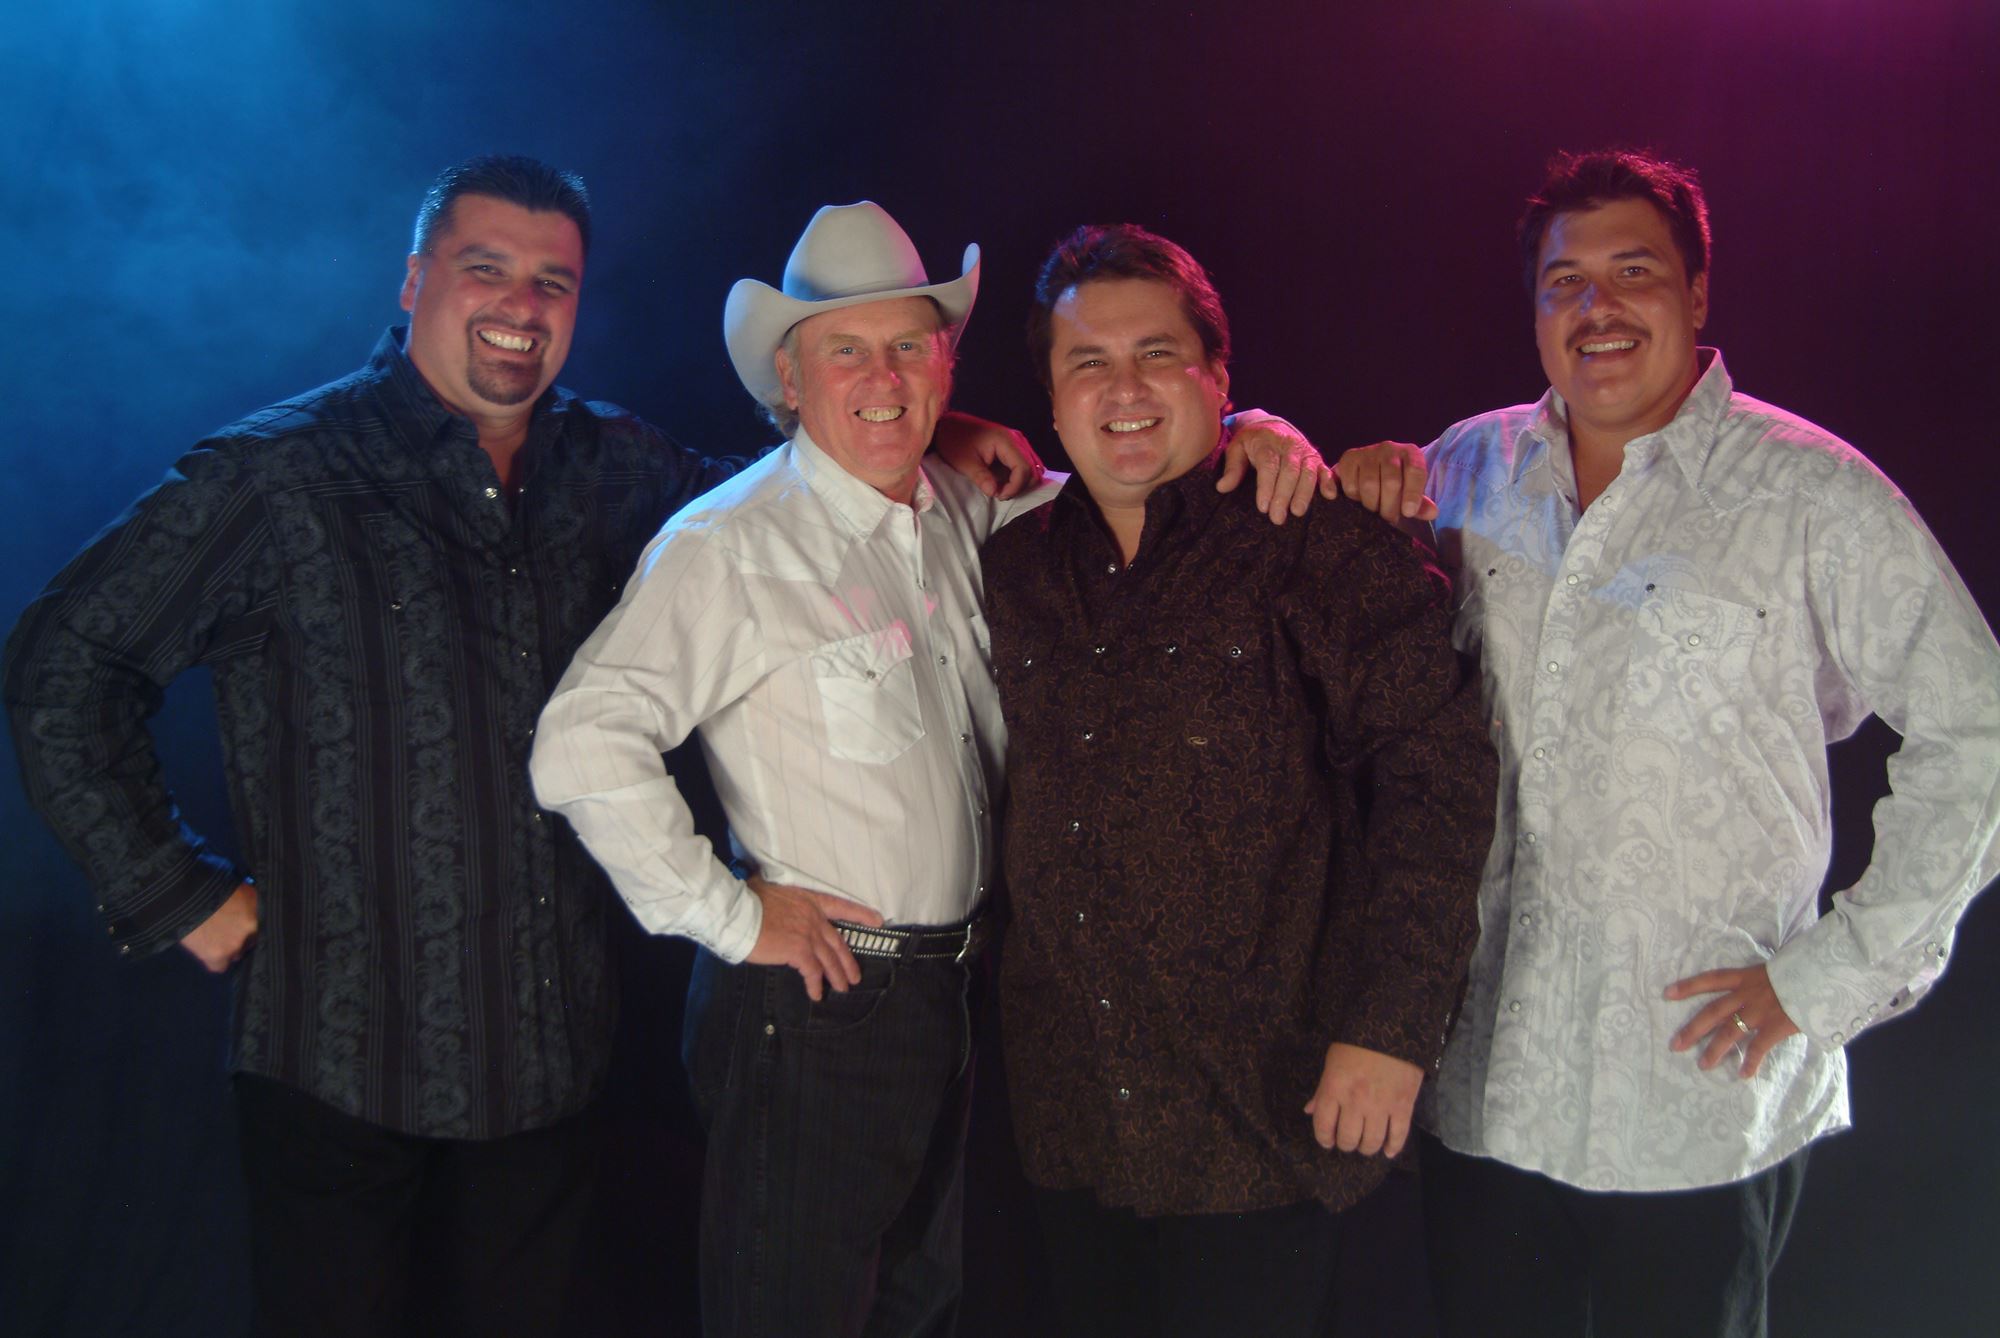 Mountain Highway to perform at Winter Texan Expo